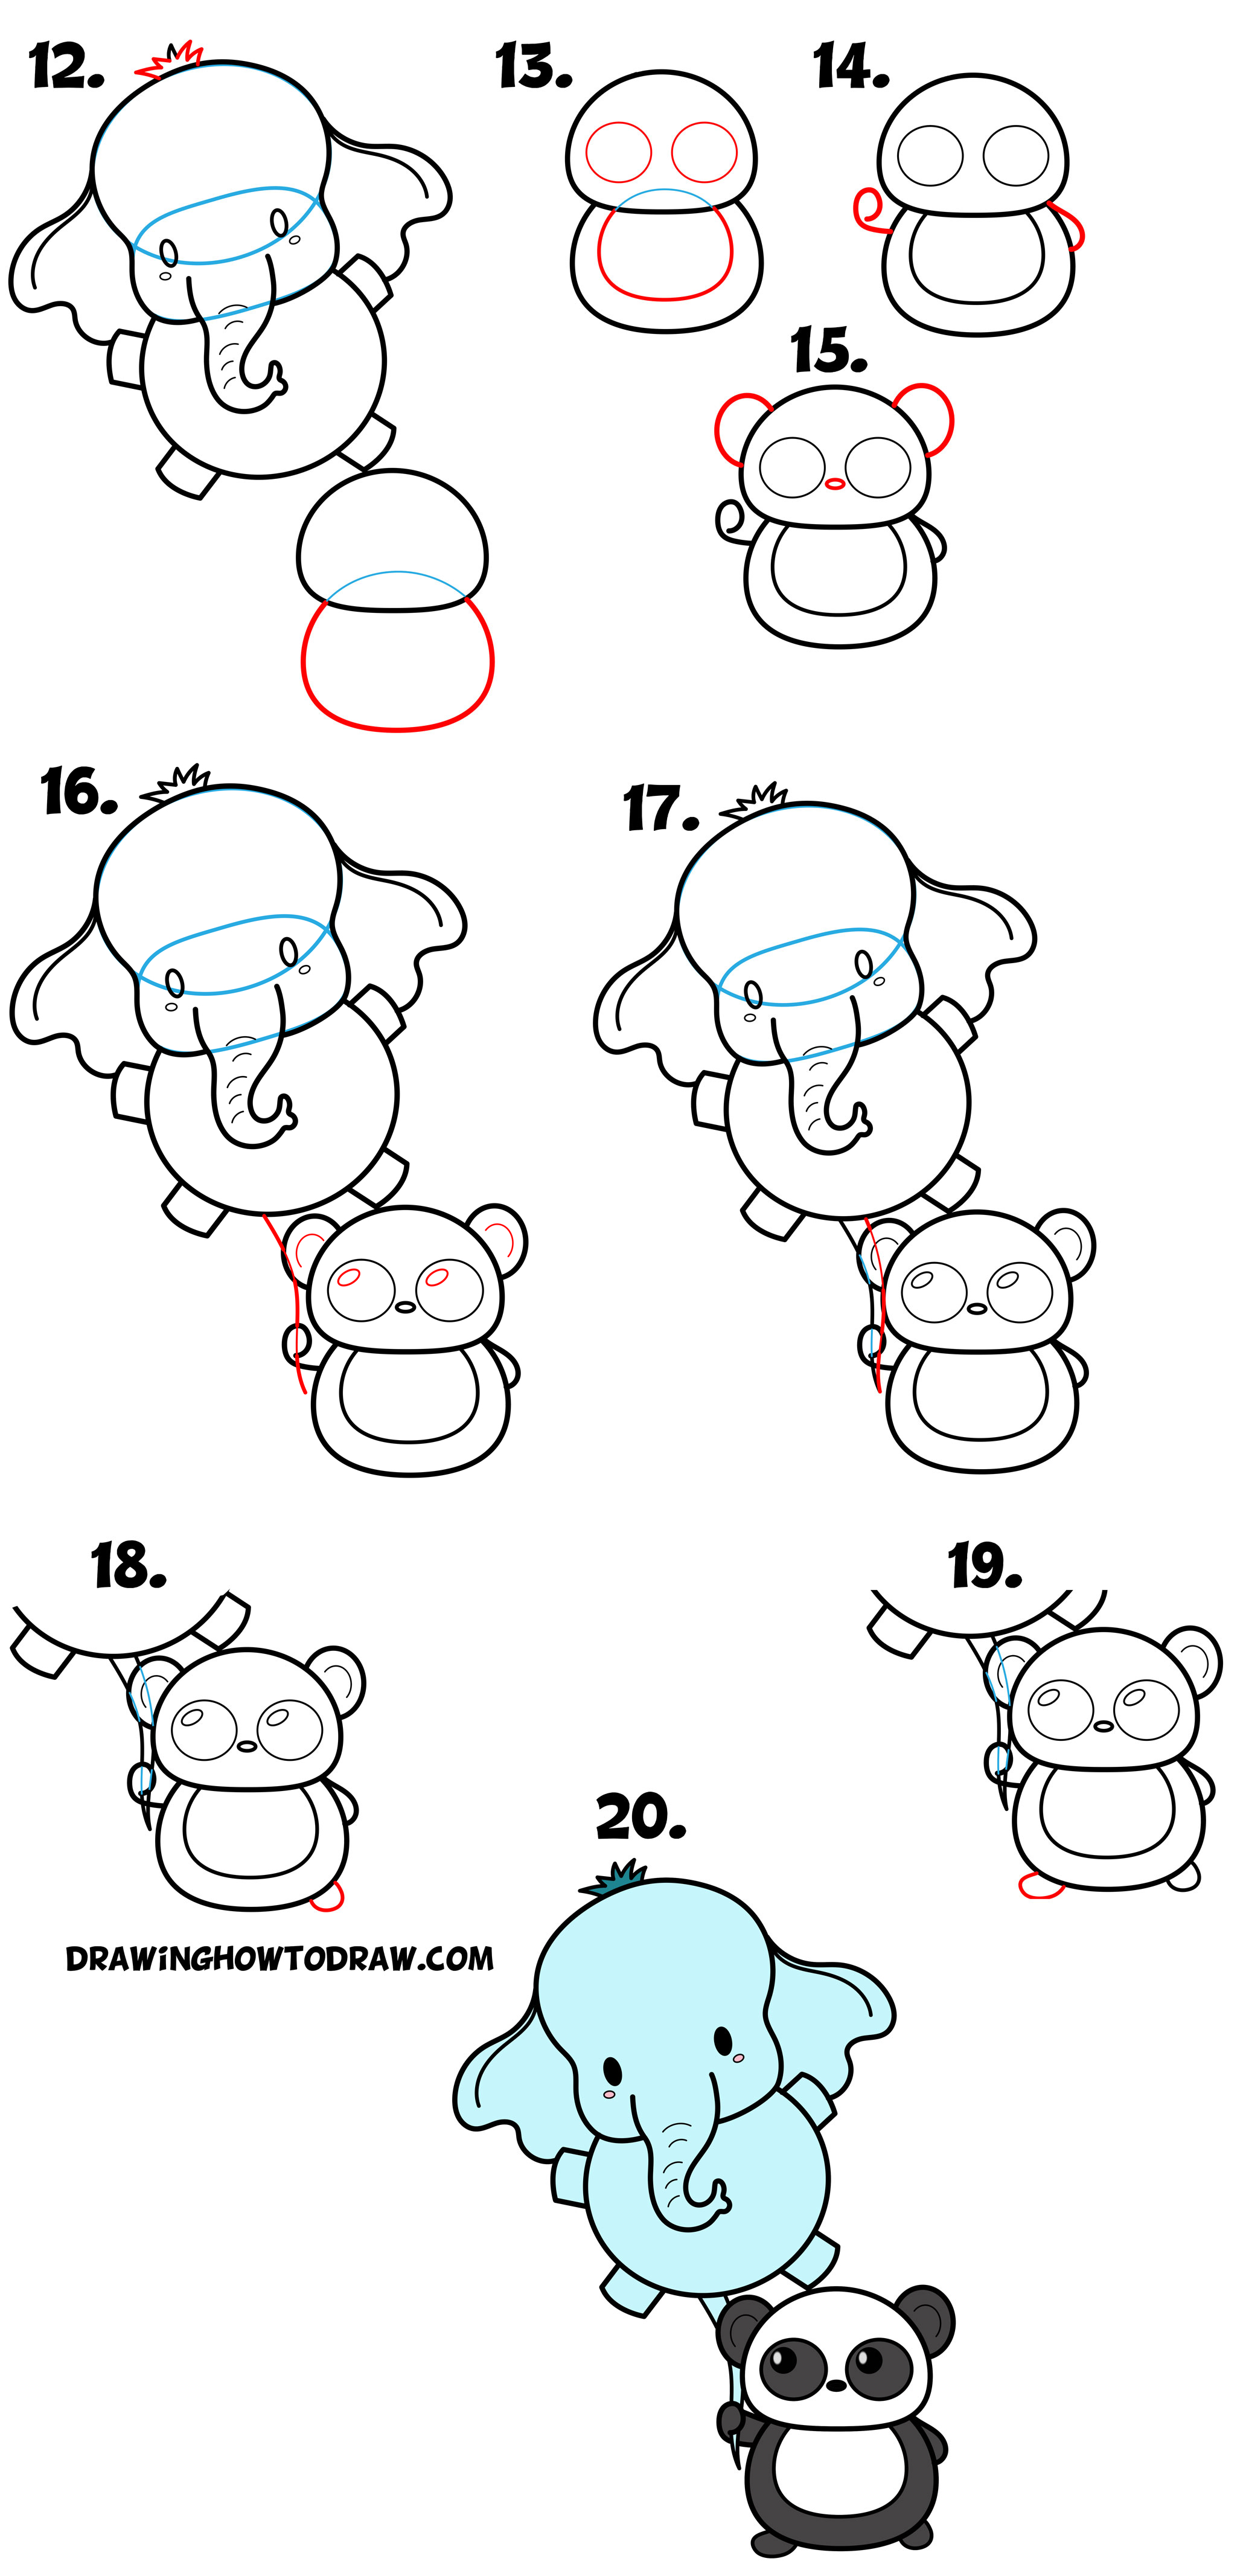 Learn How to Draw a Kawaii Panda Bear Holding an Elephant Balloon Simple Steps Drawing Lesson for Beginners